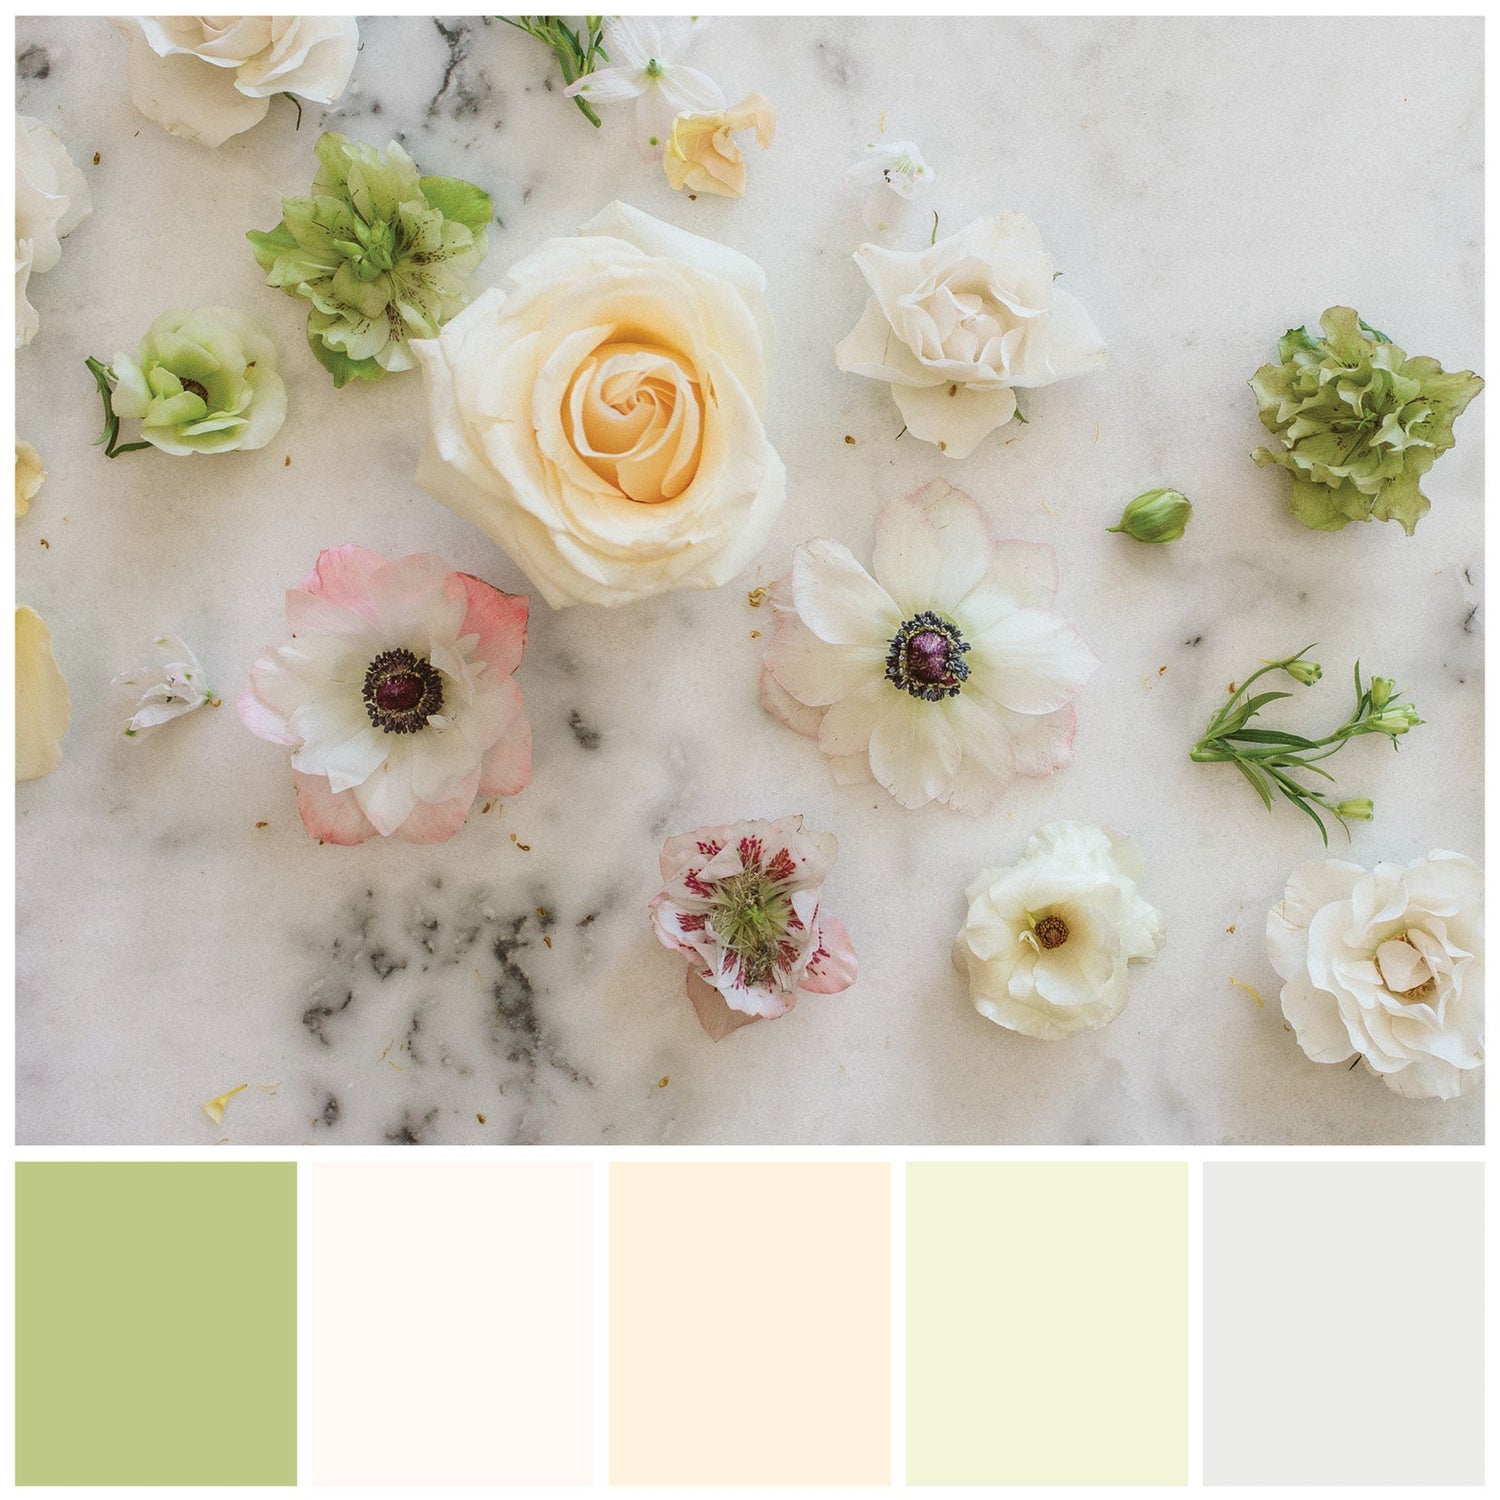 A color palette option: a flatlay of neutral-colored blooms on a marble background. The colors included are soft green and different shades of creams and whites.